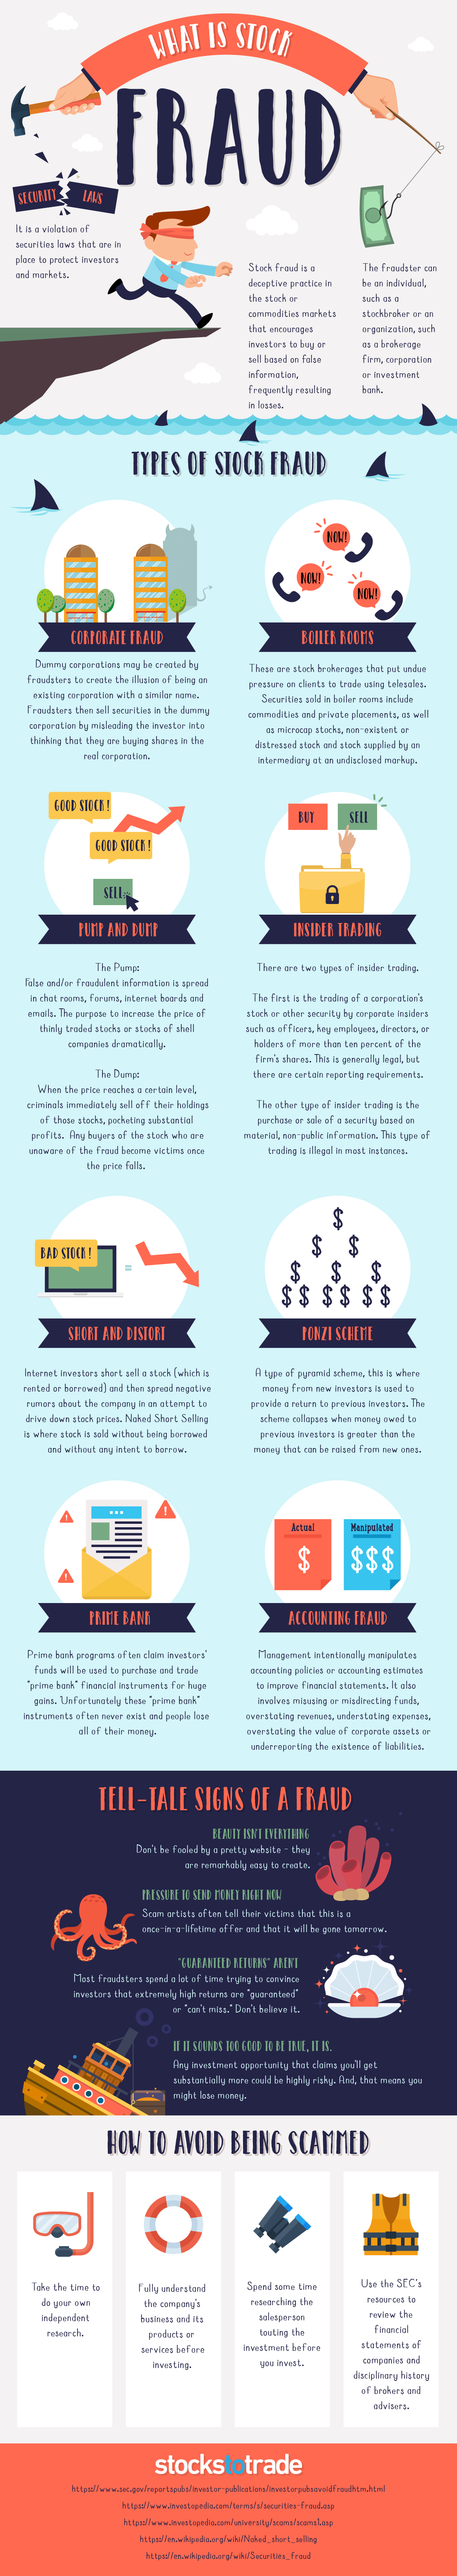 Infographic: What is Stock Fraud?